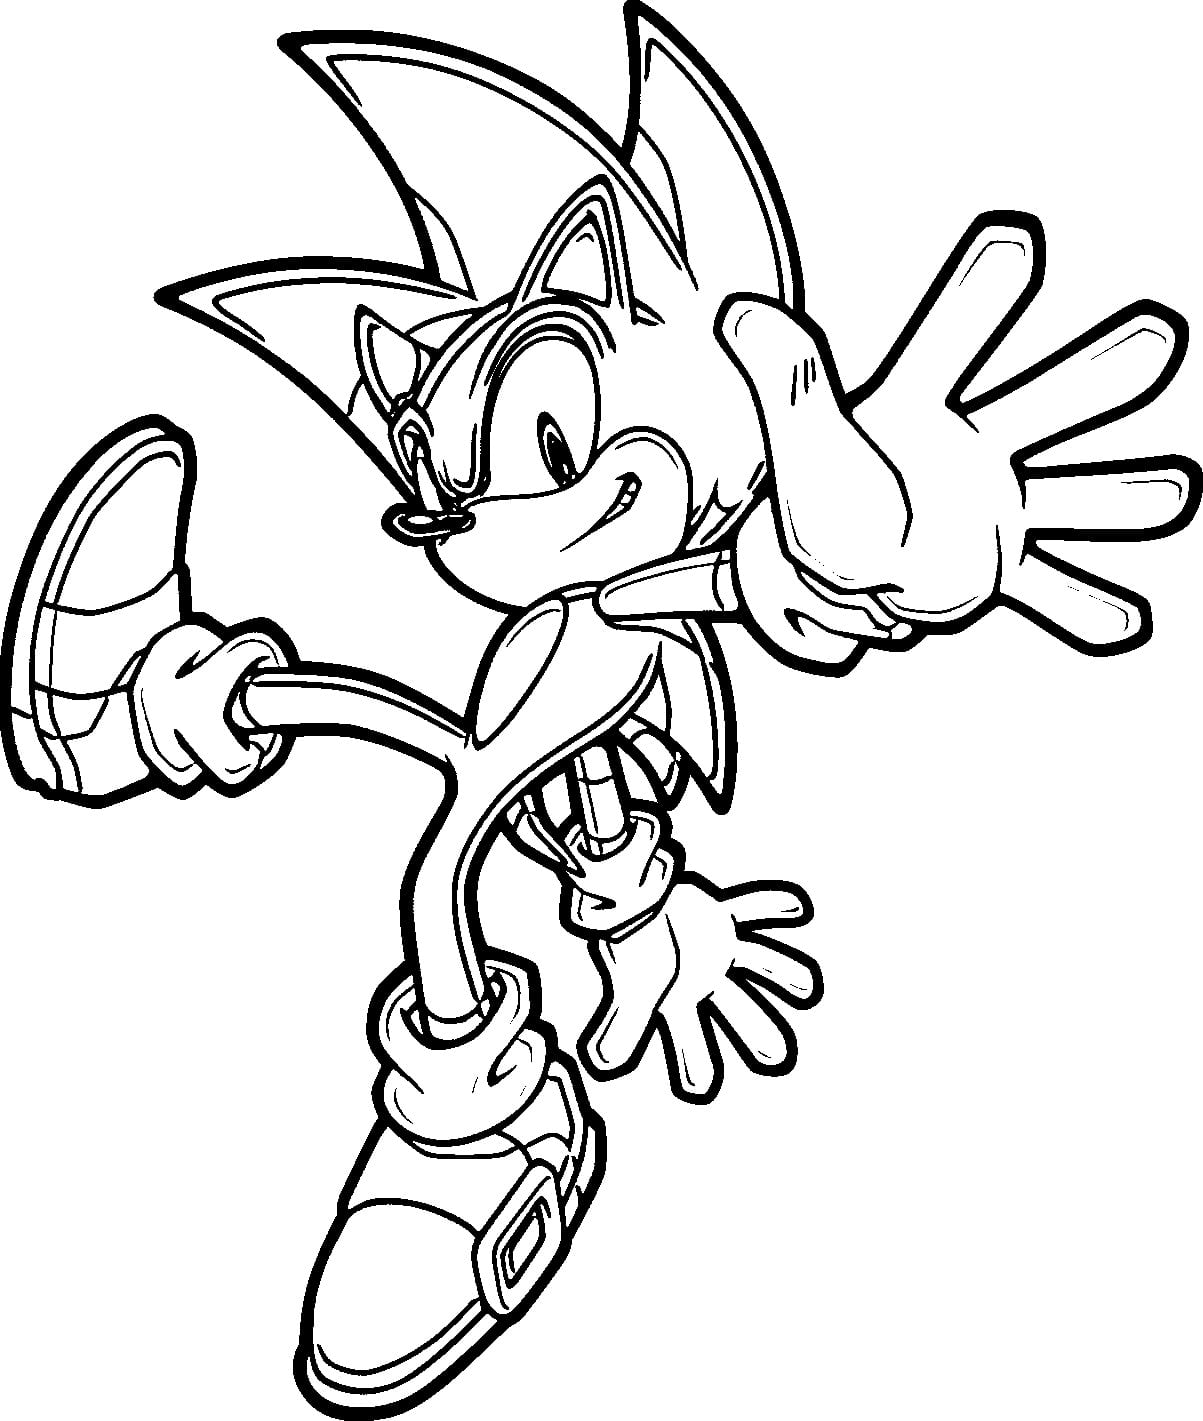 Sonic for children - Sonic Kids Coloring Pages